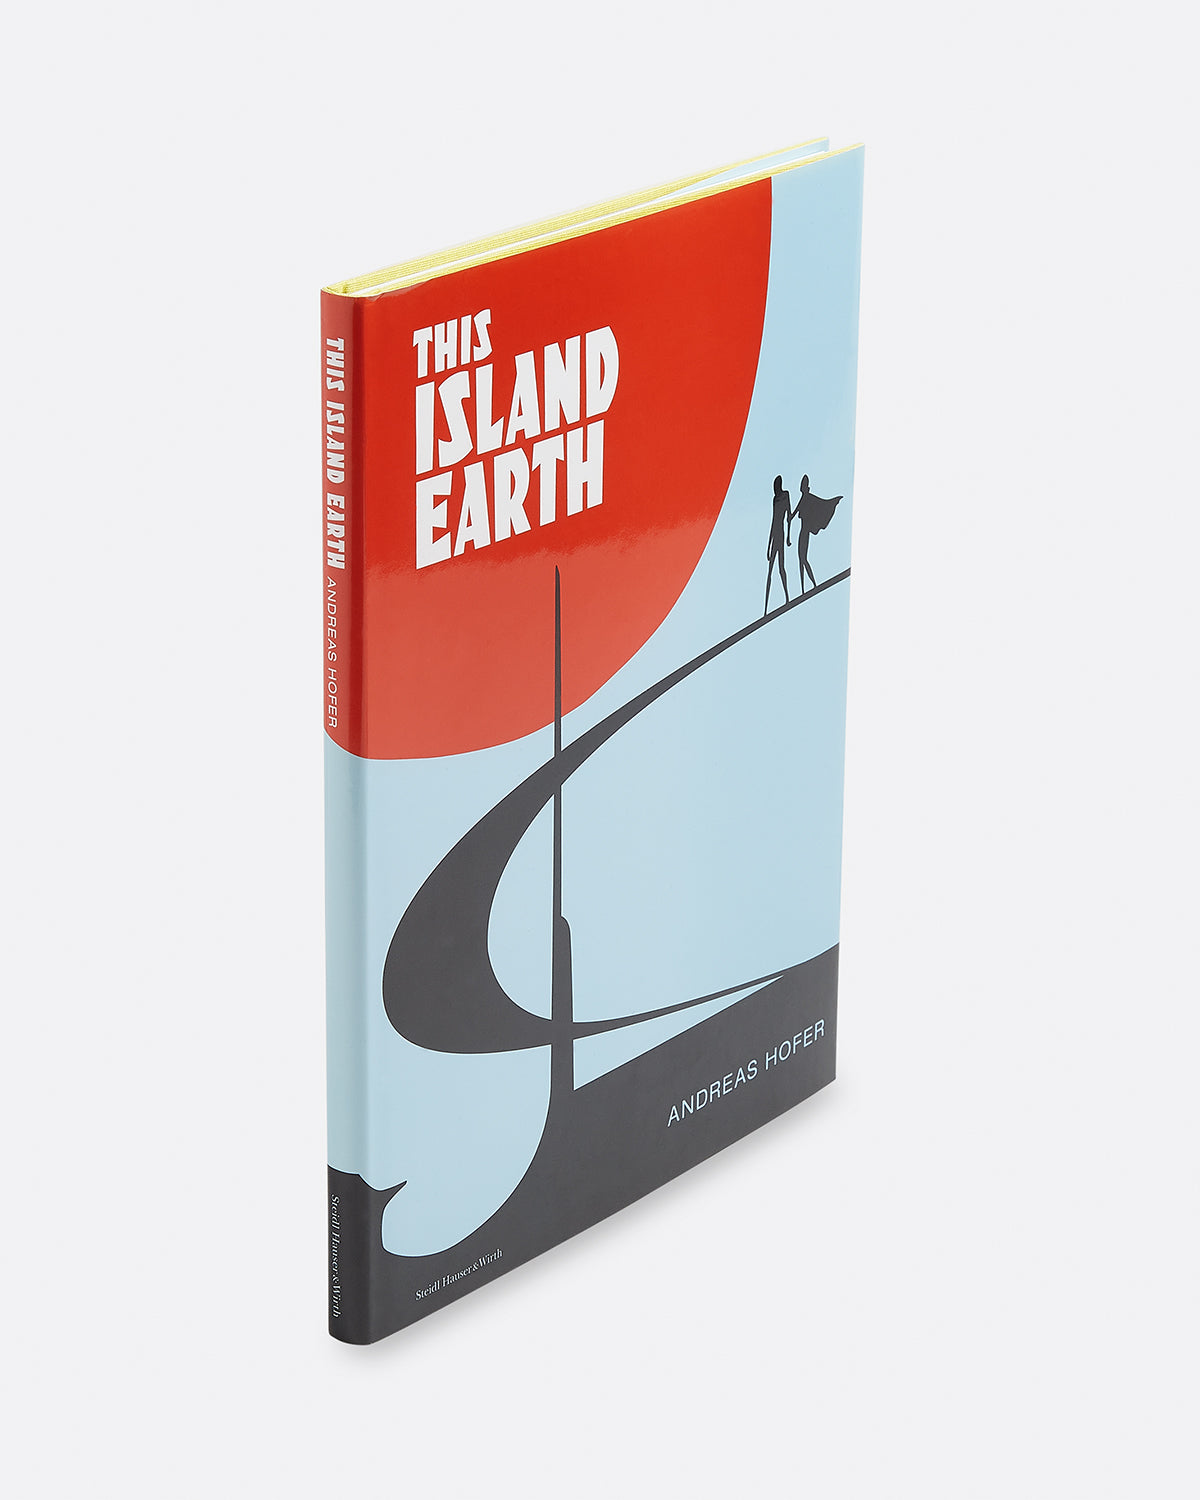 Andy Hope 1930: This Island Earth Default Title